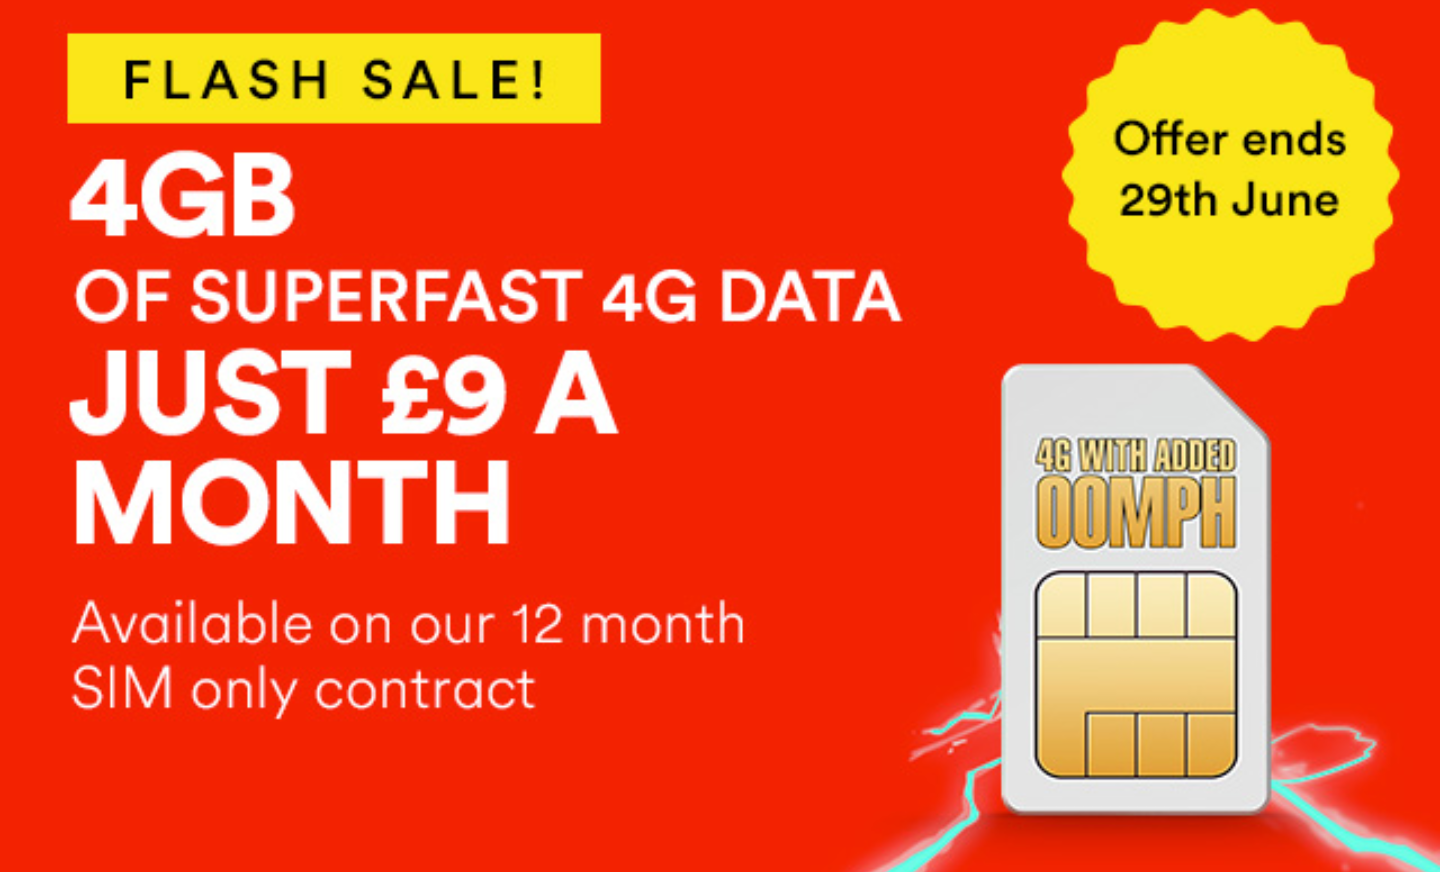 £9 per month for 4GB   Virgin SIM only deal